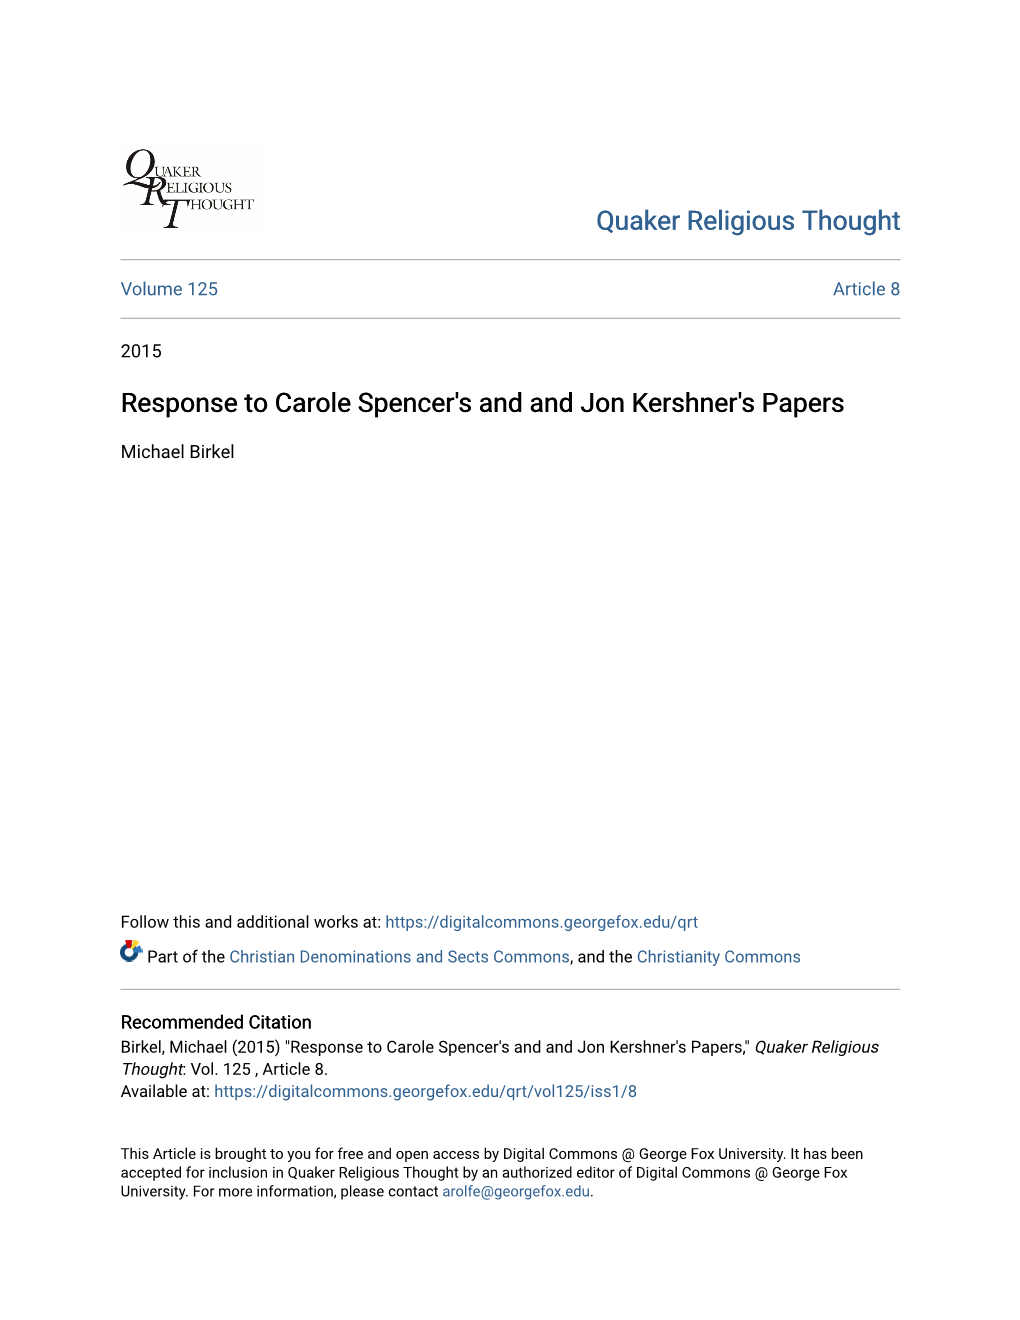 Response to Carole Spencer's and and Jon Kershner's Papers